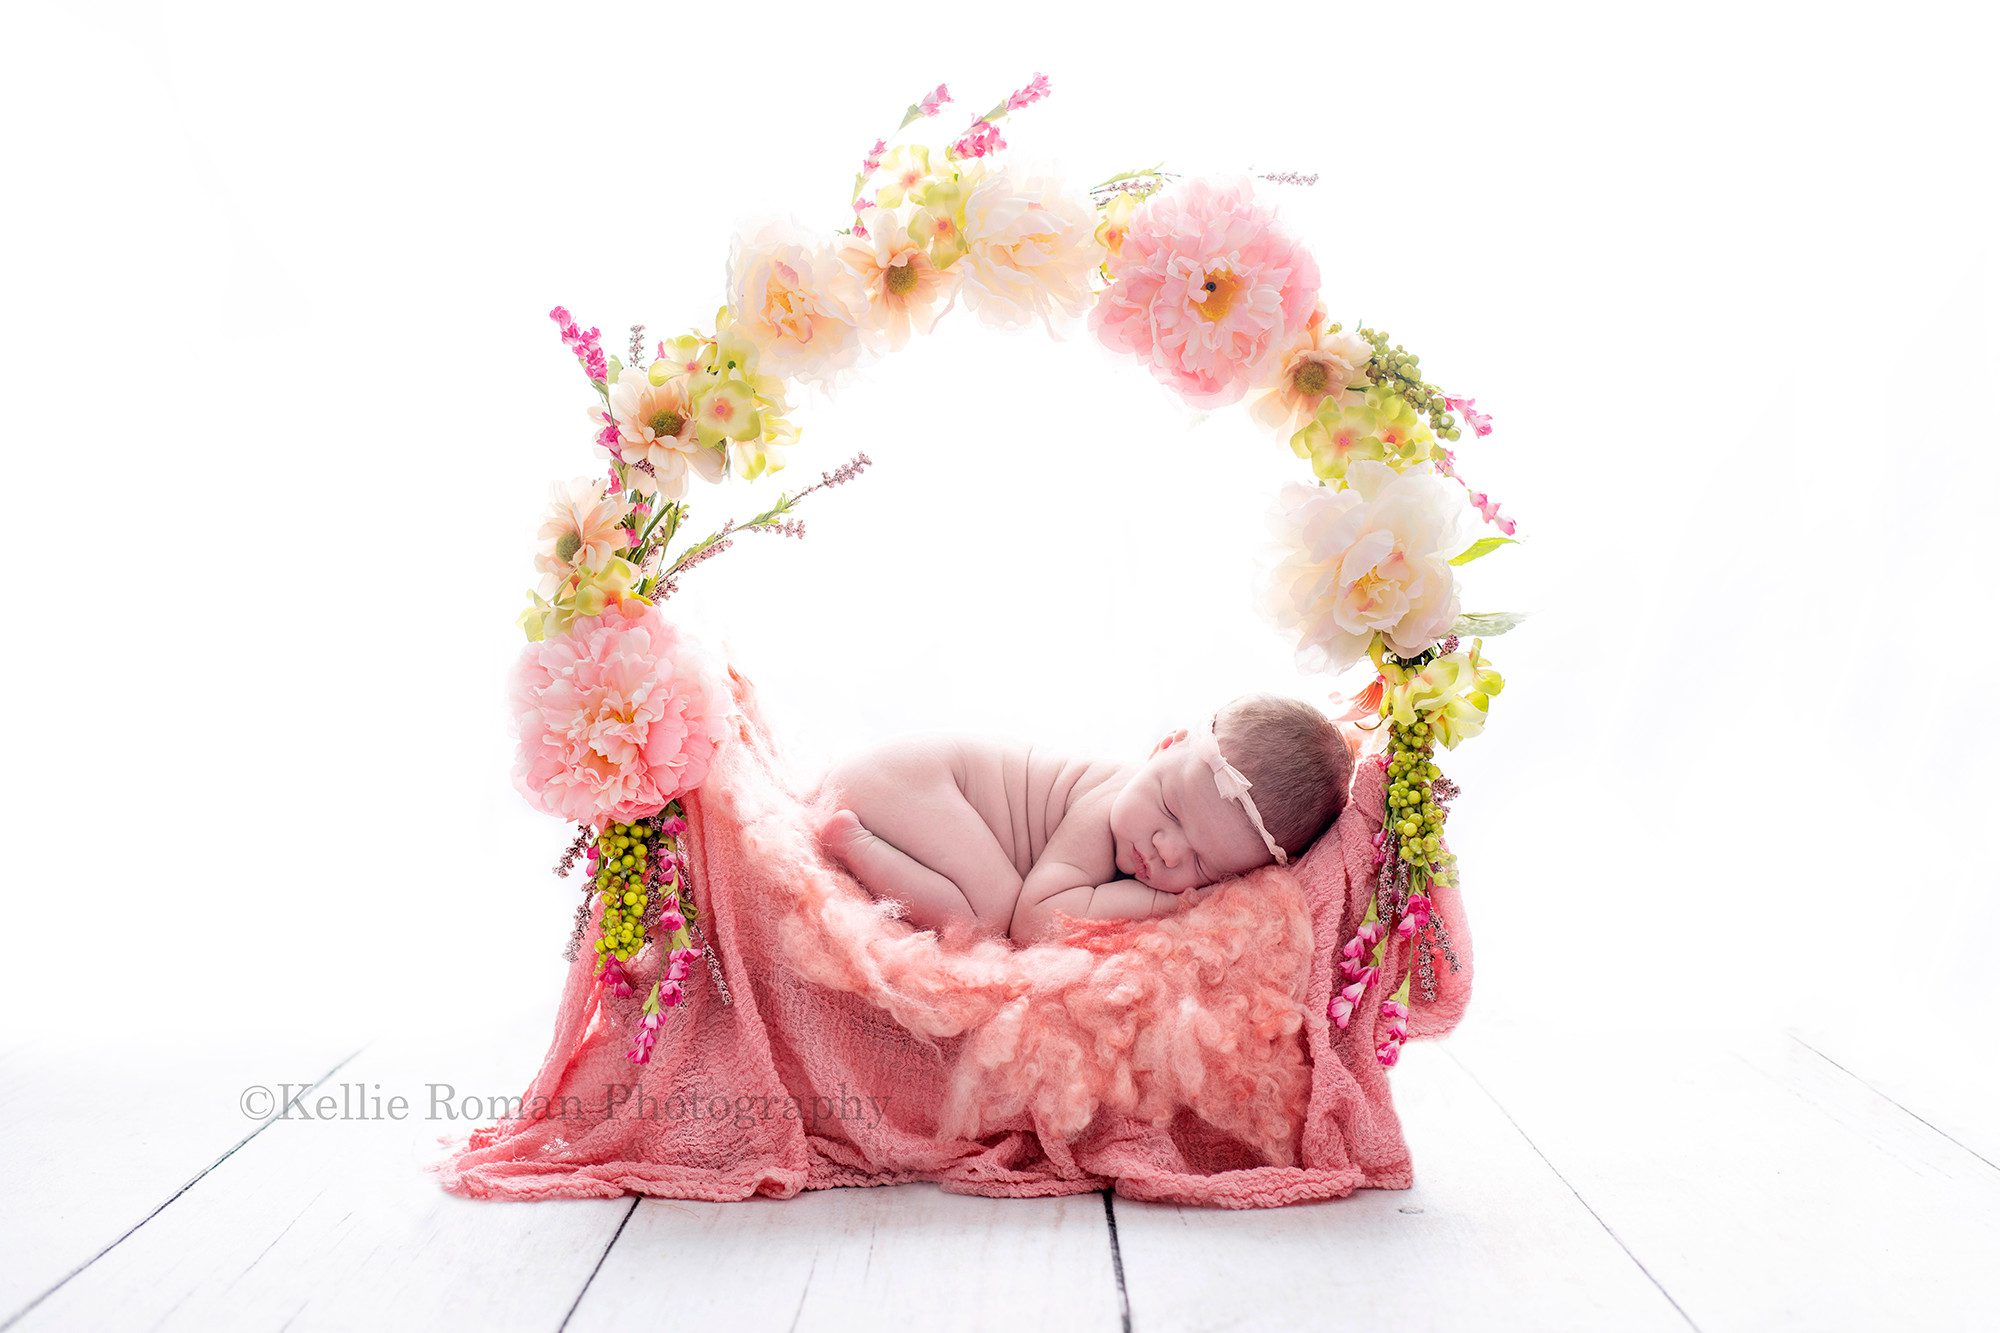 baby photos a newborn baby girl is curled up on her tummy on a floral ring bed the bed has pink and green flowers surrounding her light a wreath the bottom has different textures of pink fabric the baby is sleeping and has a small pink bow headband on there is backlighting so the image is very bright and white